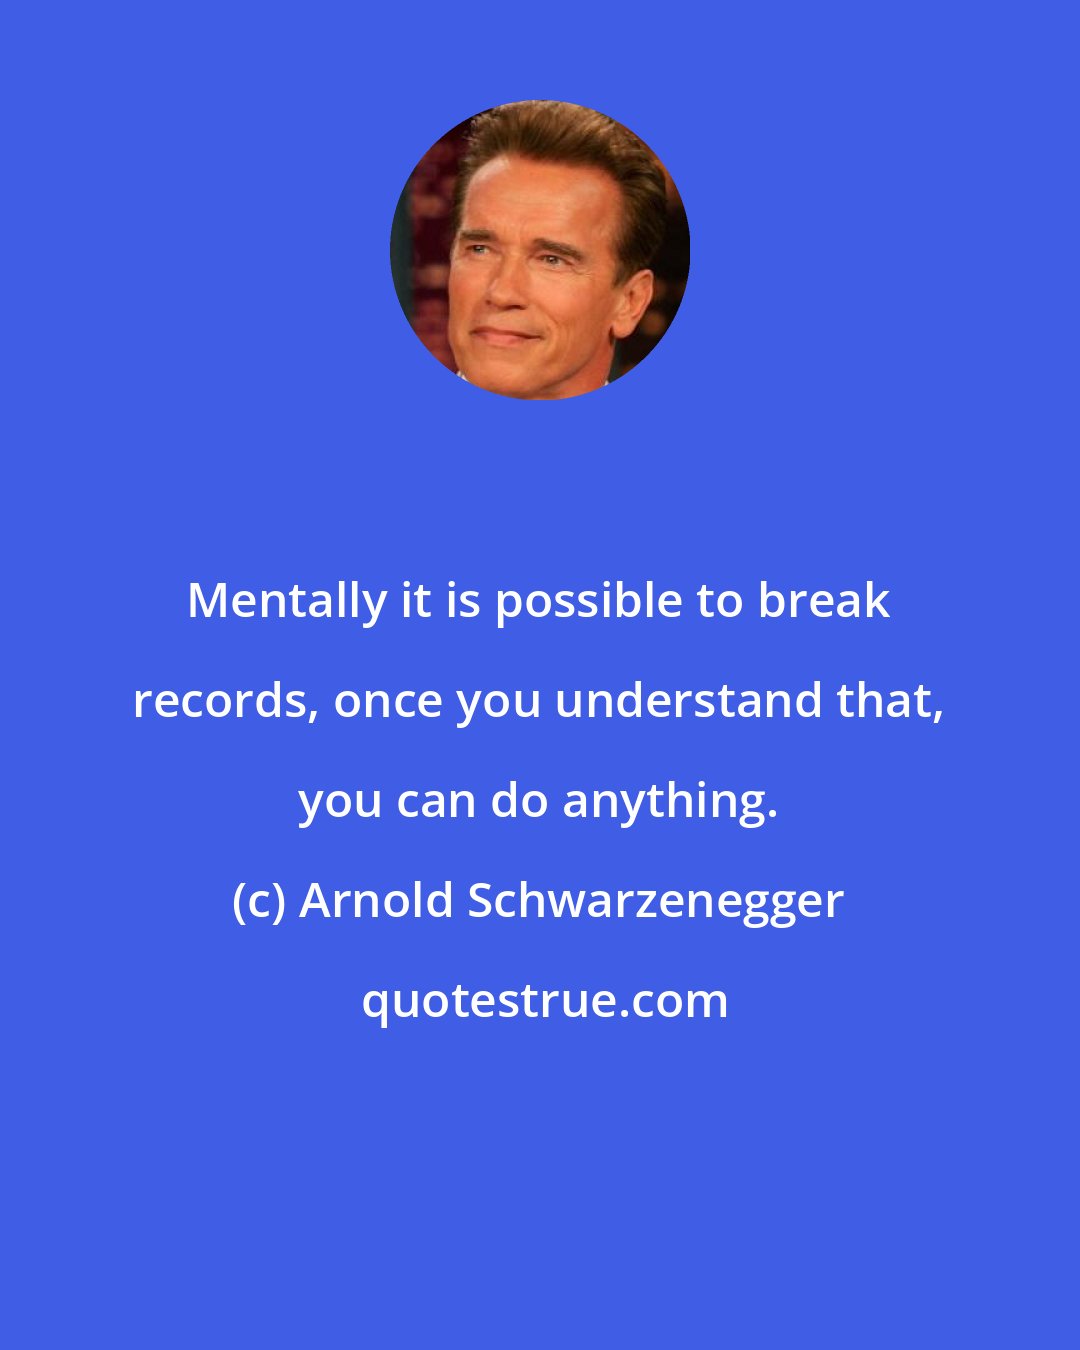 Arnold Schwarzenegger: Mentally it is possible to break records, once you understand that, you can do anything.